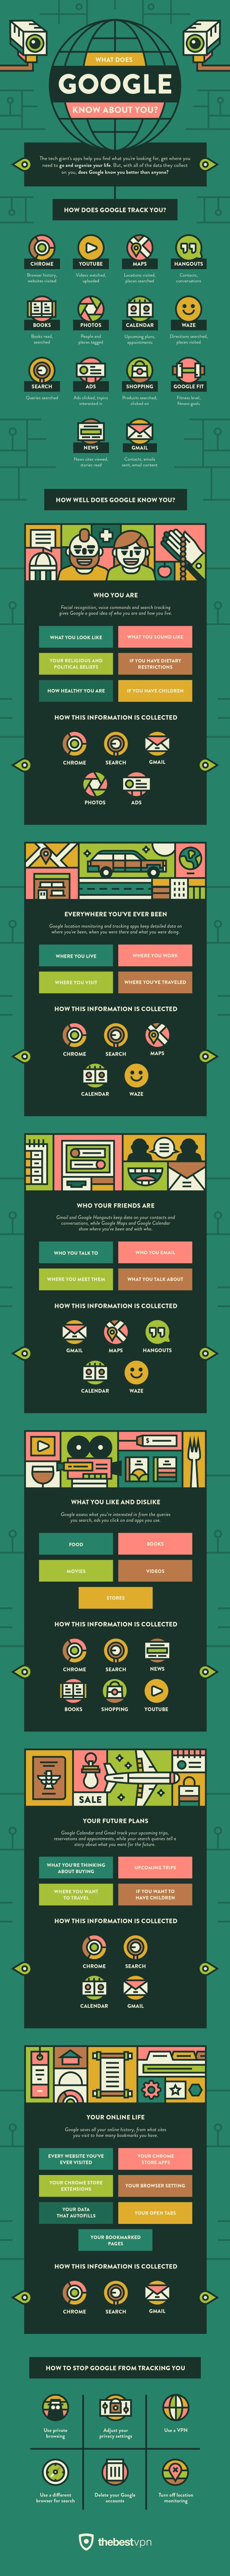 What Google knows infographic